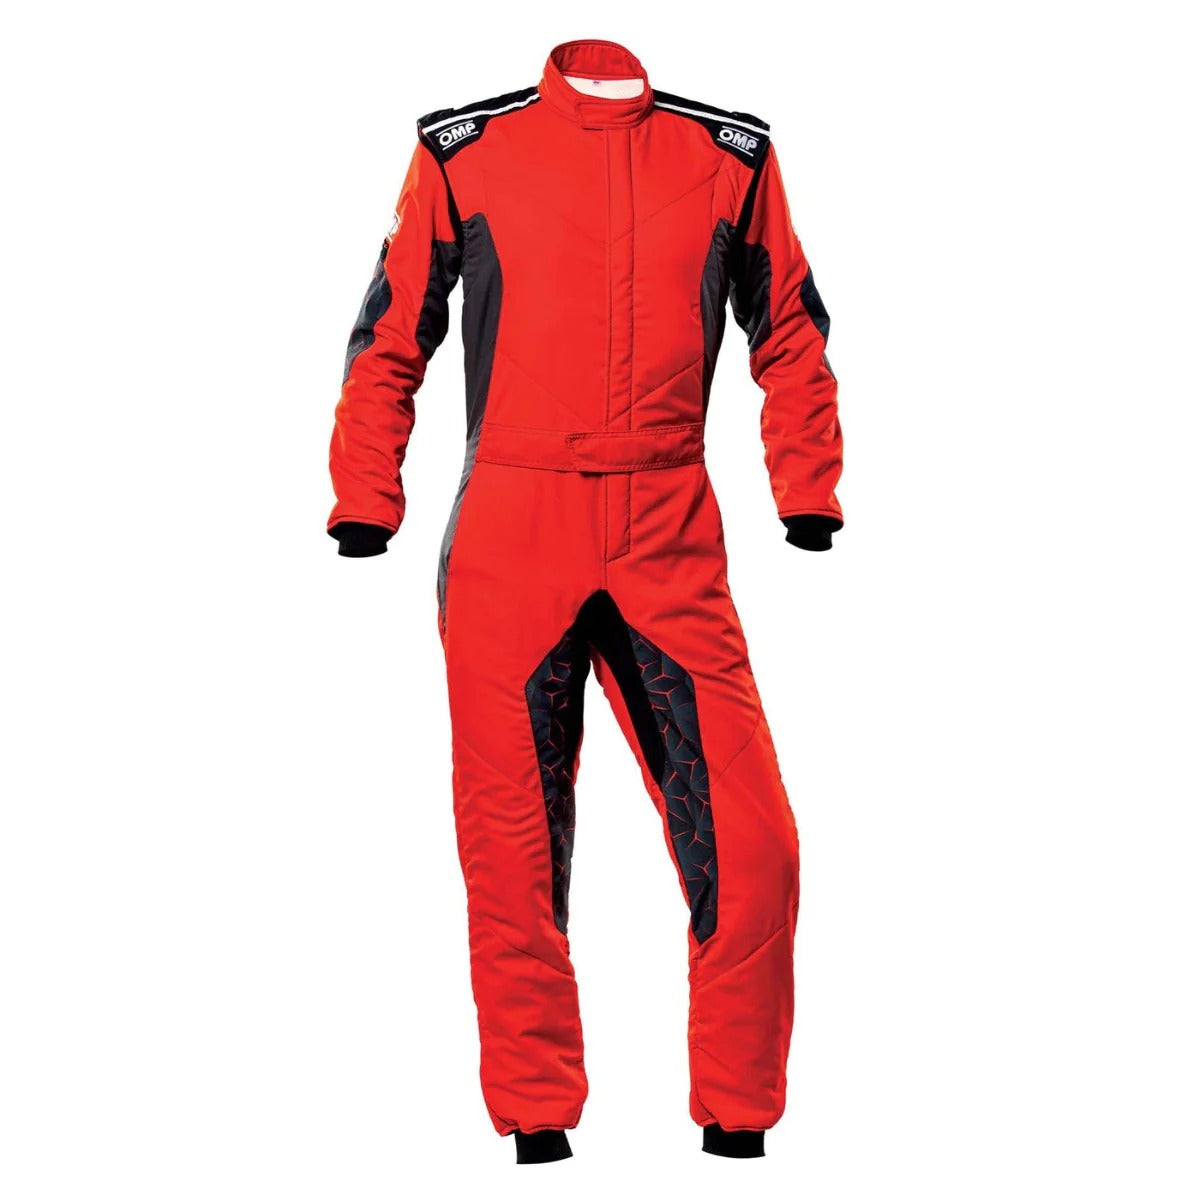 OMP TECHNICA HYBRID RACE SUIT RED / BLACK FRONT IMAGE